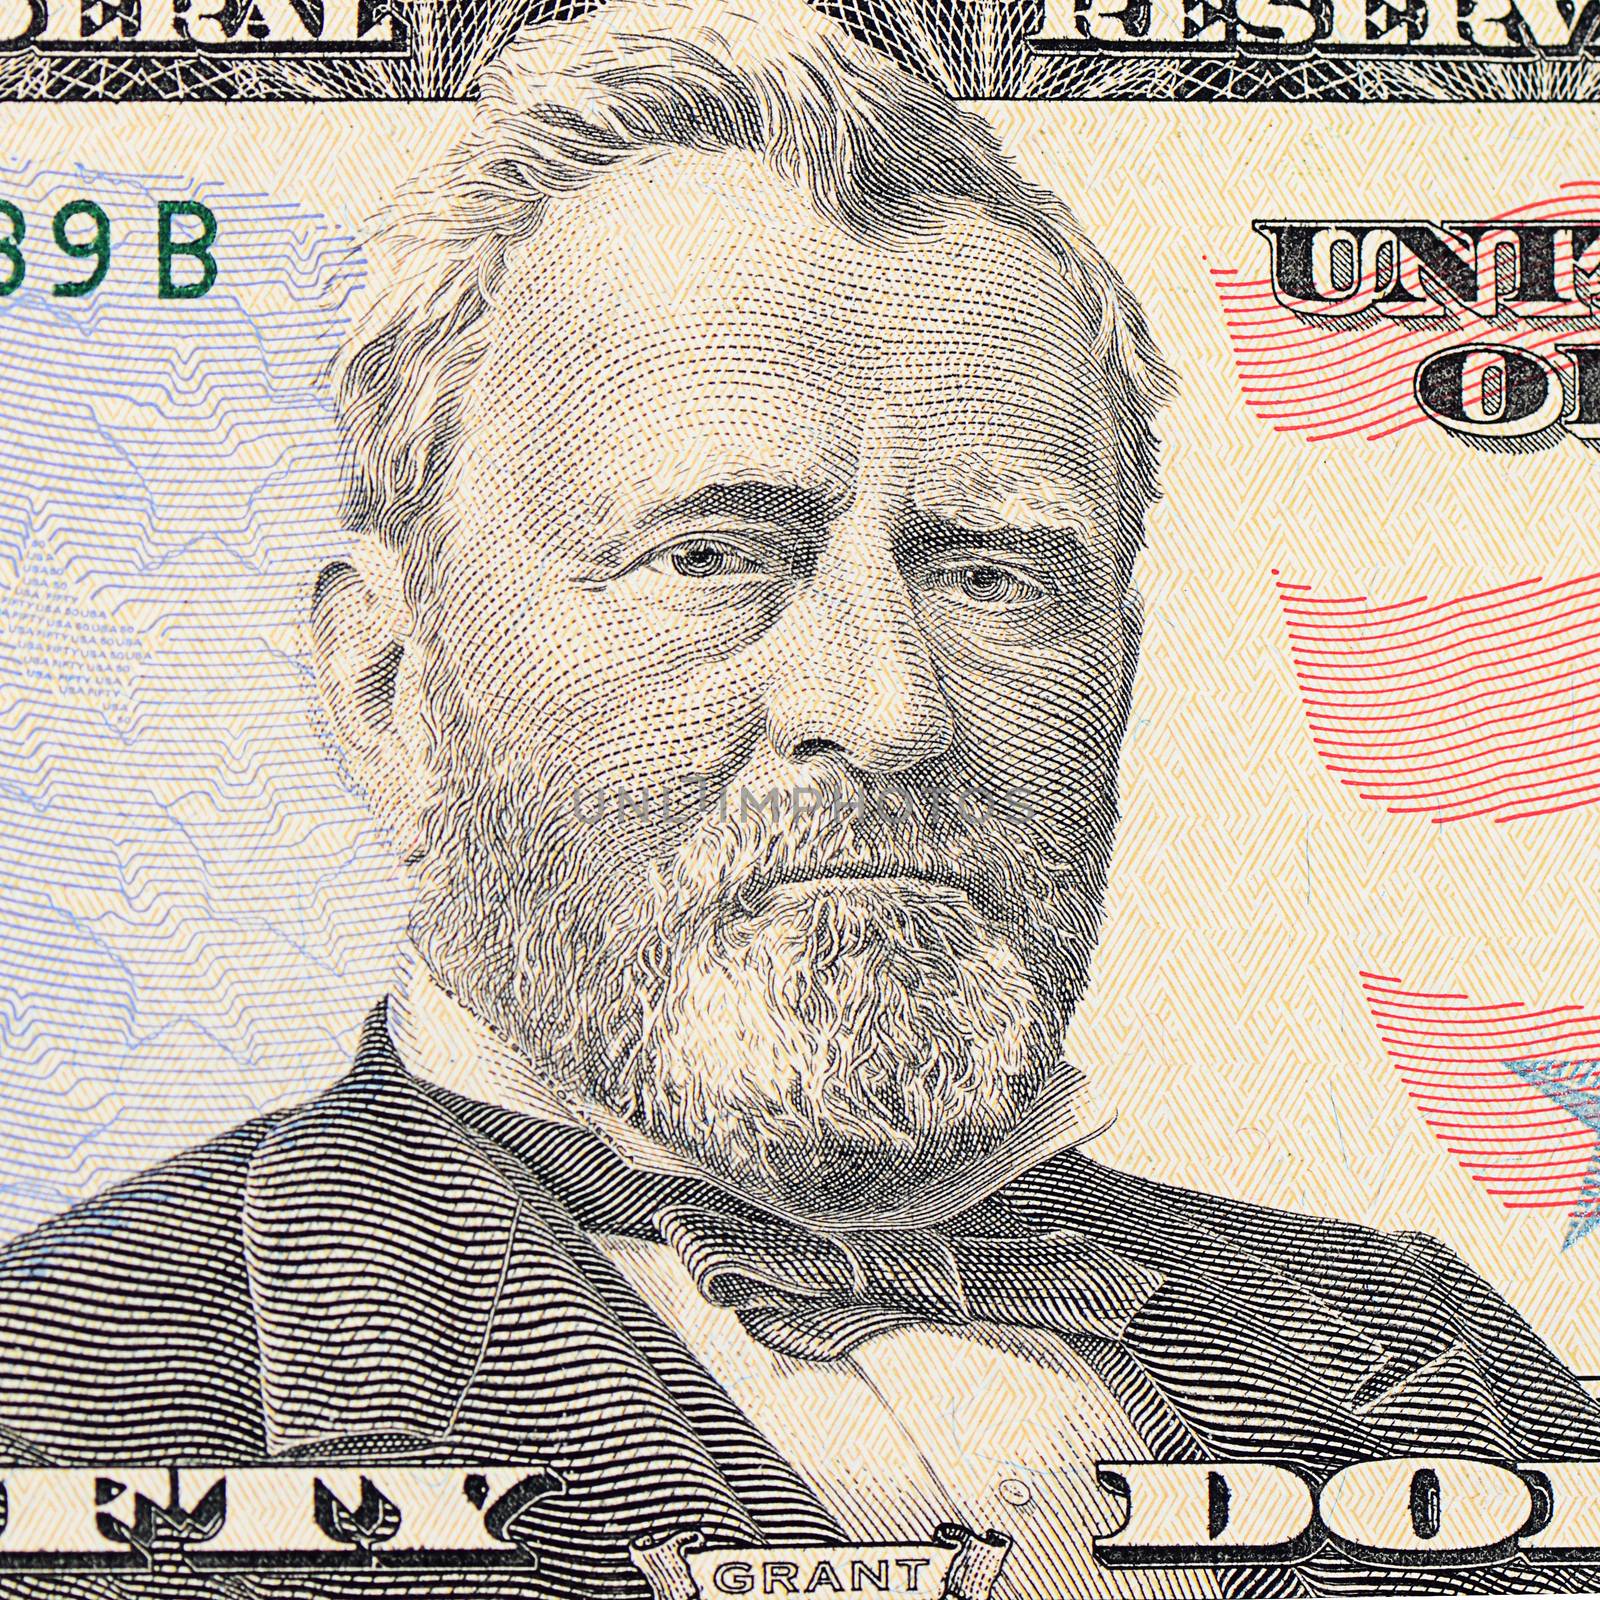 The face of Grant the dollar bill